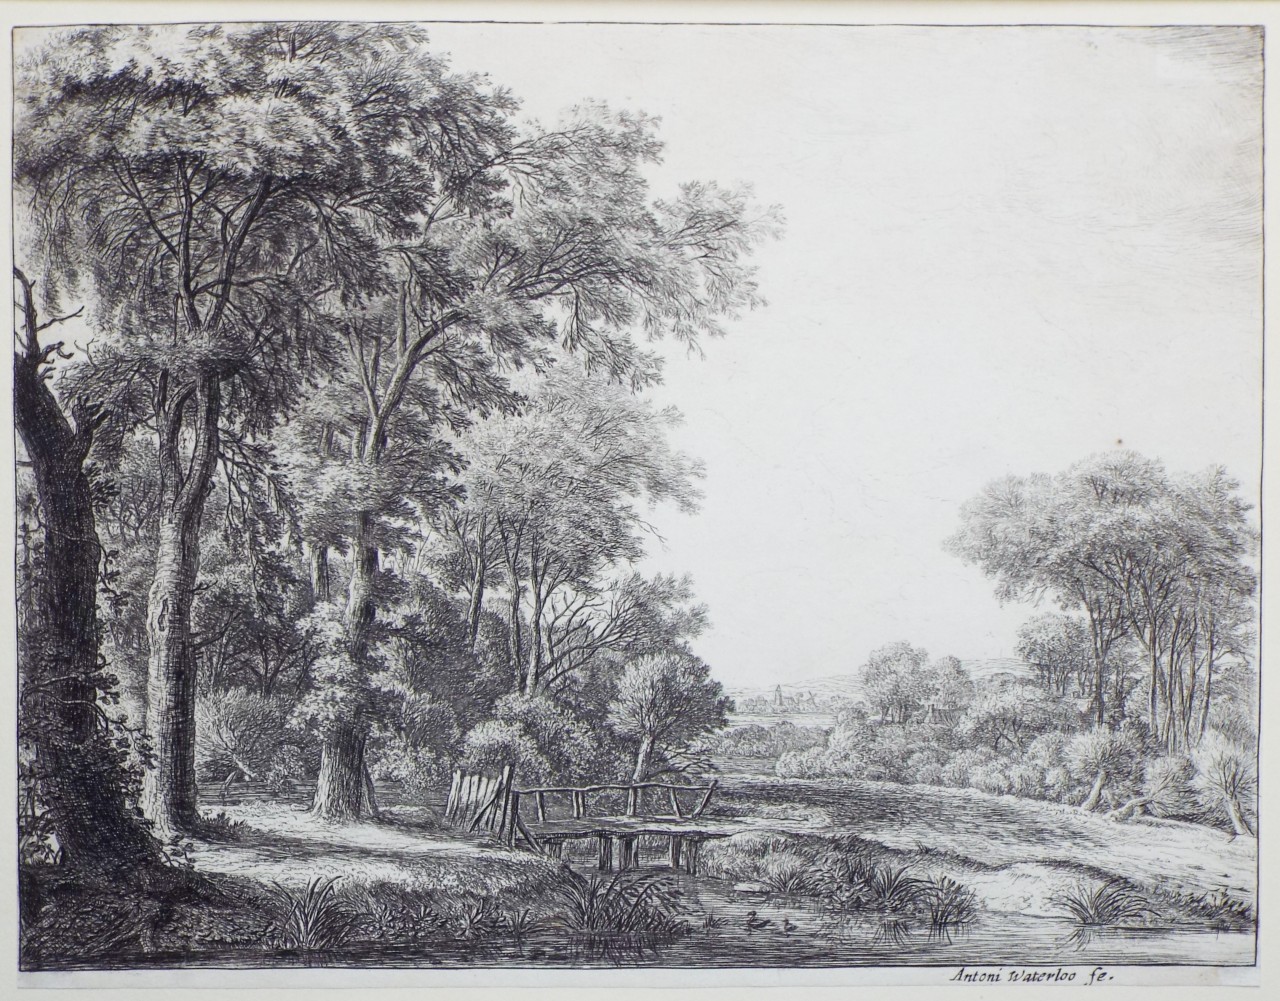 Etching - Entrance Into a Forest by a Little Wooden Bridge - Waterloo